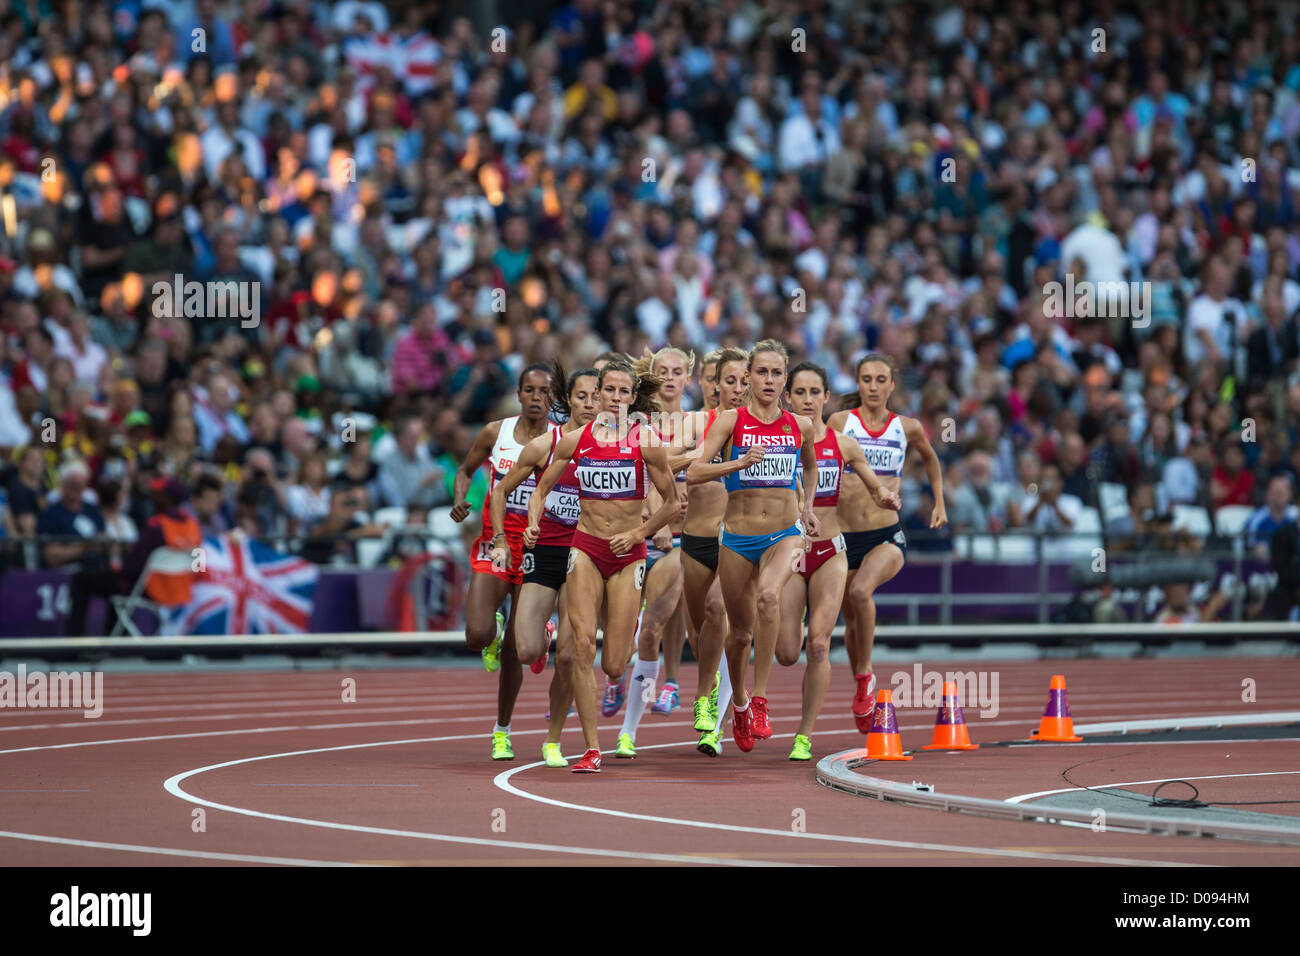 Morgan Uceny (USA) and Ekaterina Kostetskaya (RUS) lead the pack in the Women's 1500m semifinal at the Olympic Summer Games, Stock Photo